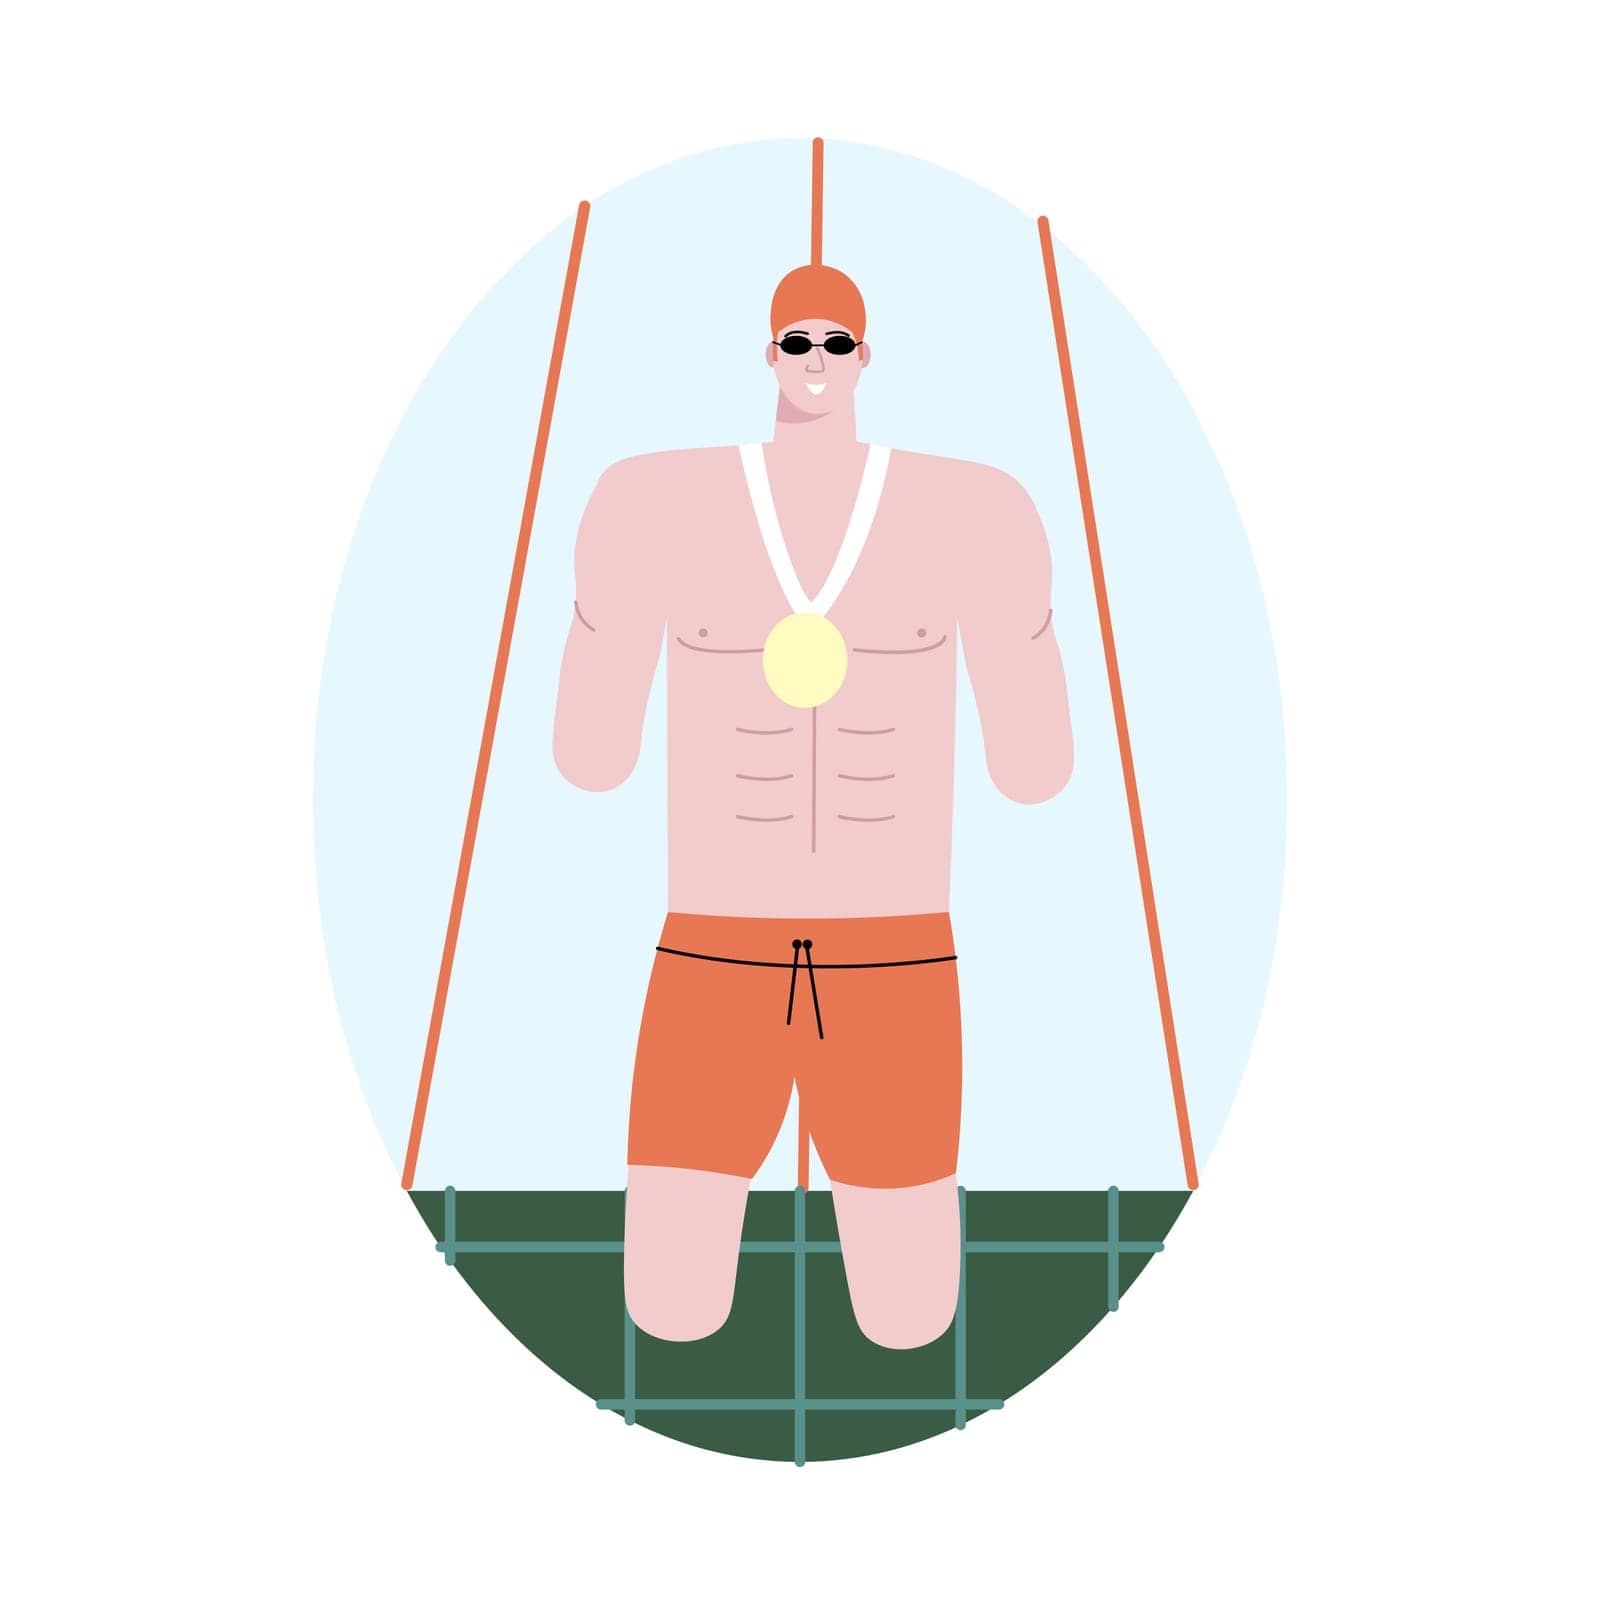 Three december world day of disabled people vector logo design. A man without arms and legs with a medal on his chest stands on the edge of the pool.